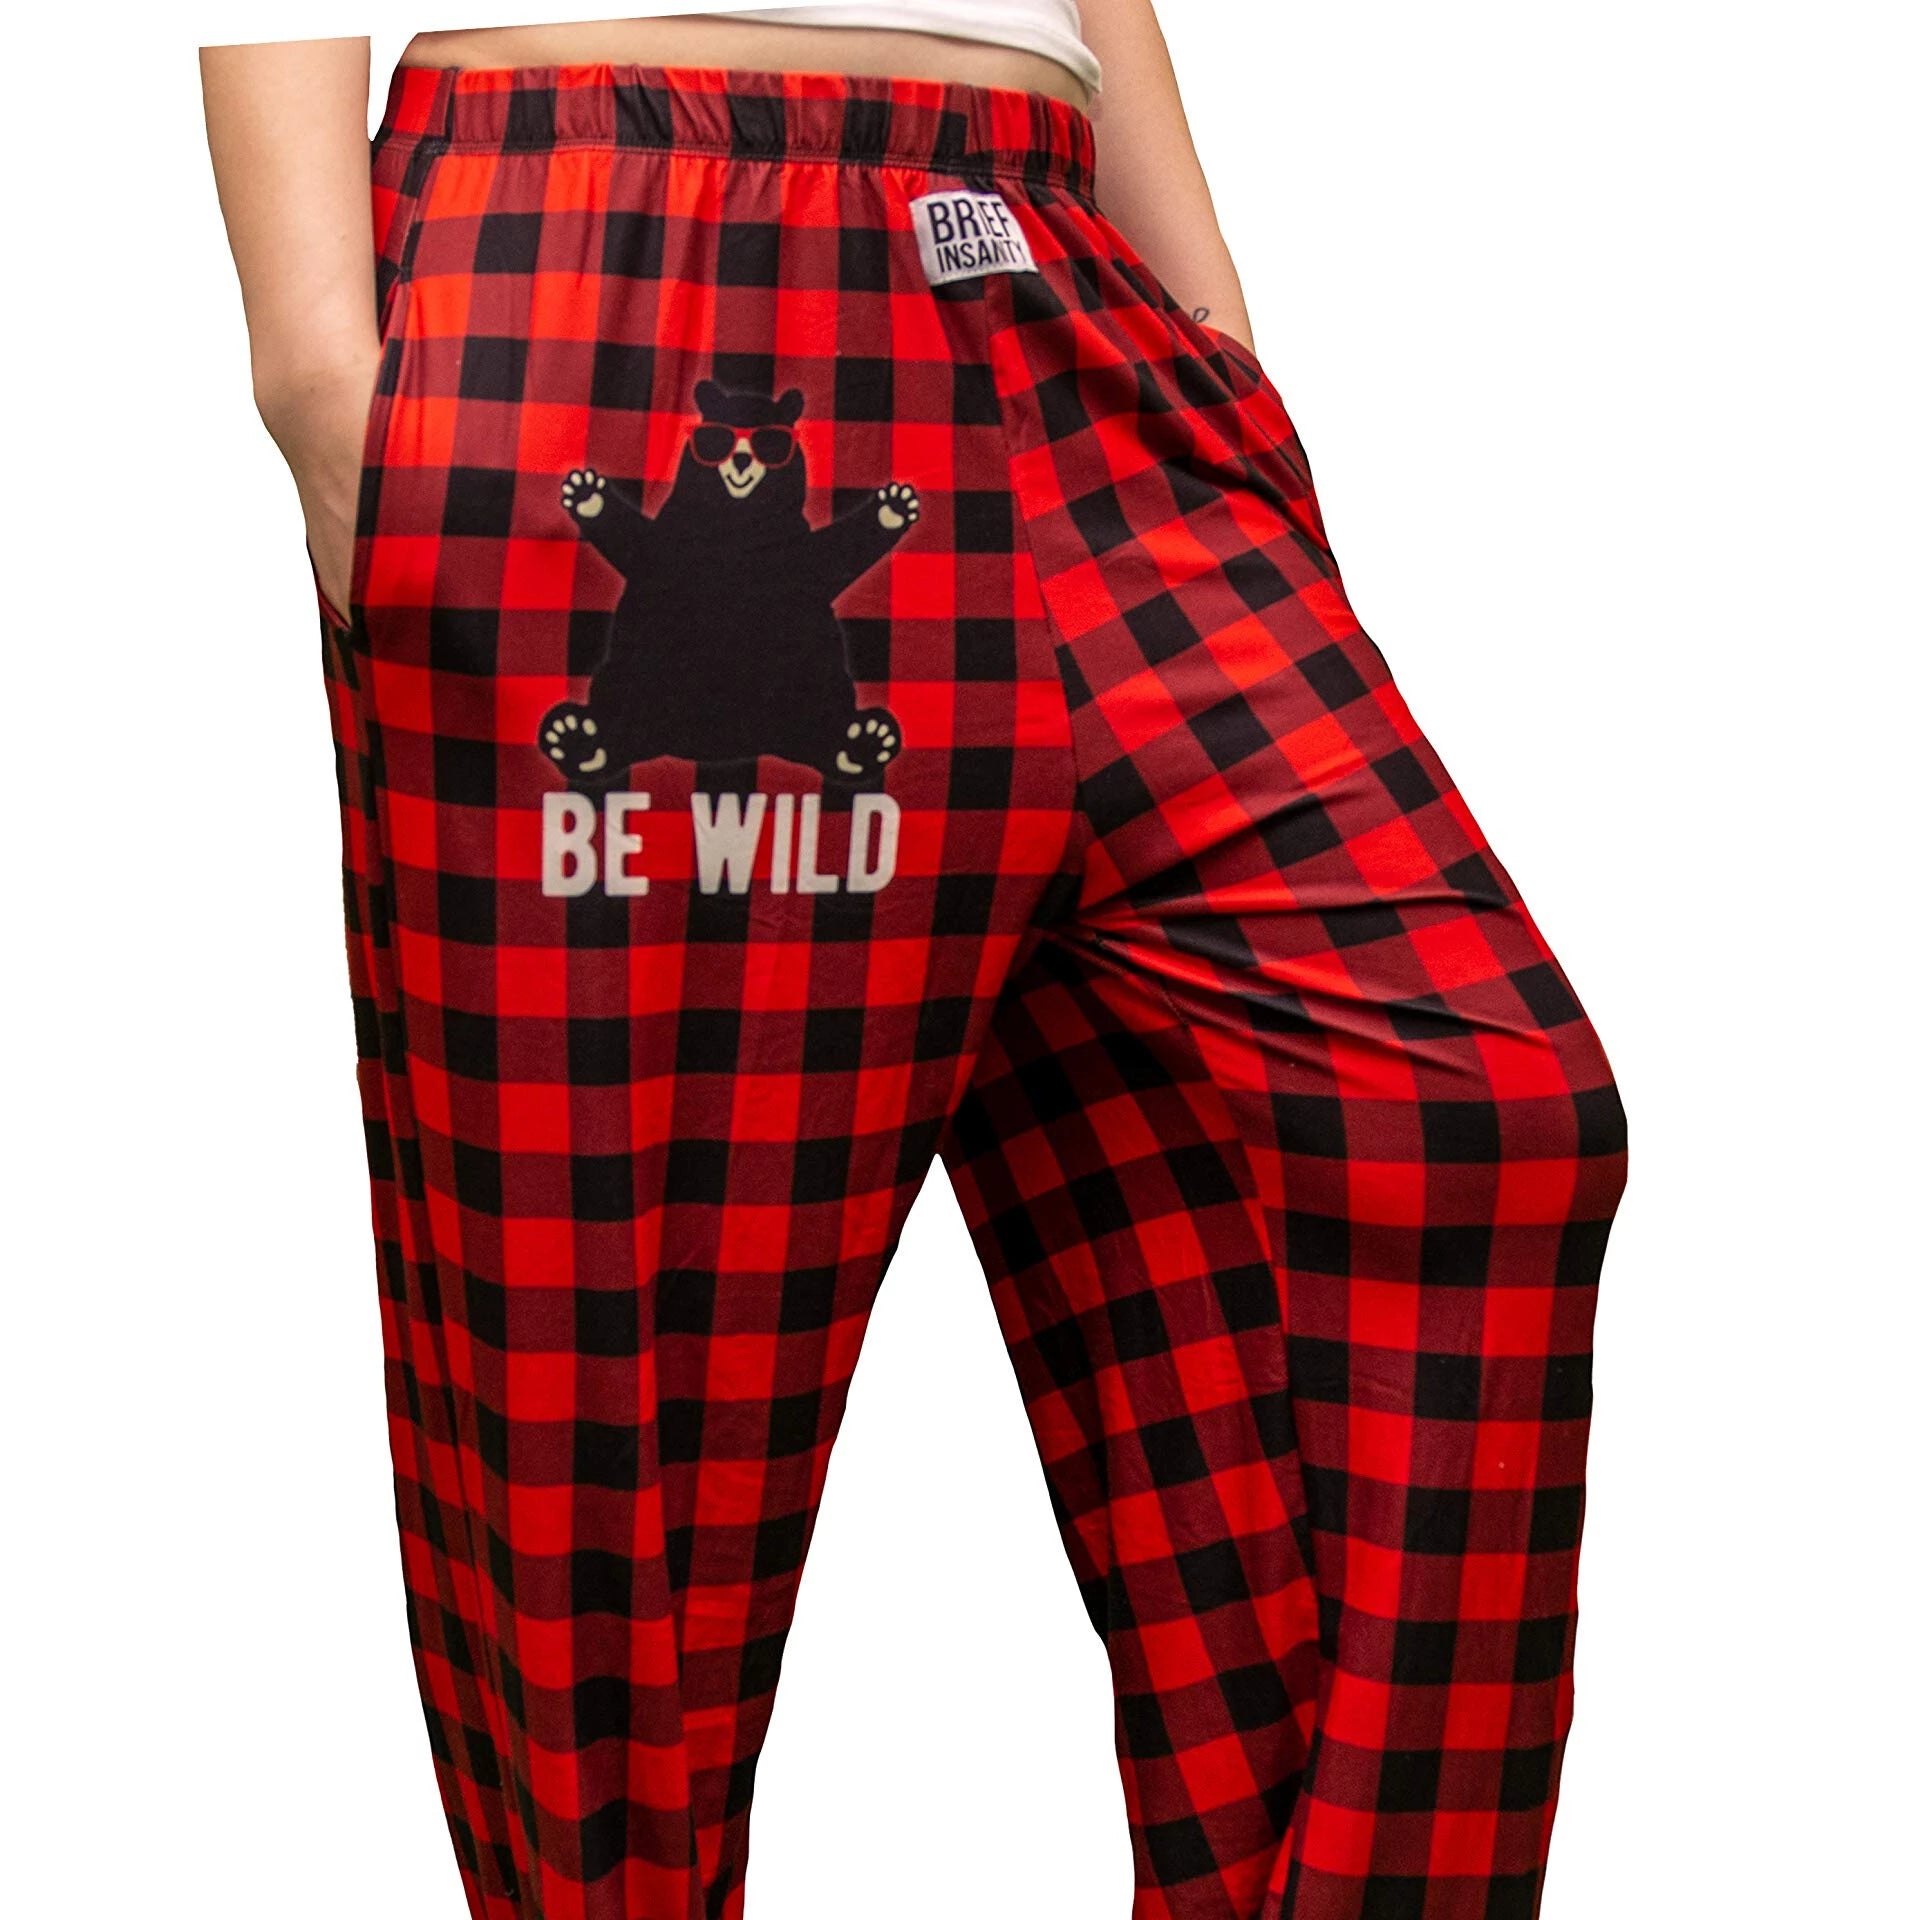 Brief Insanity  The Comfiest Loungewear, Pajama Pants, Boxer Shorts